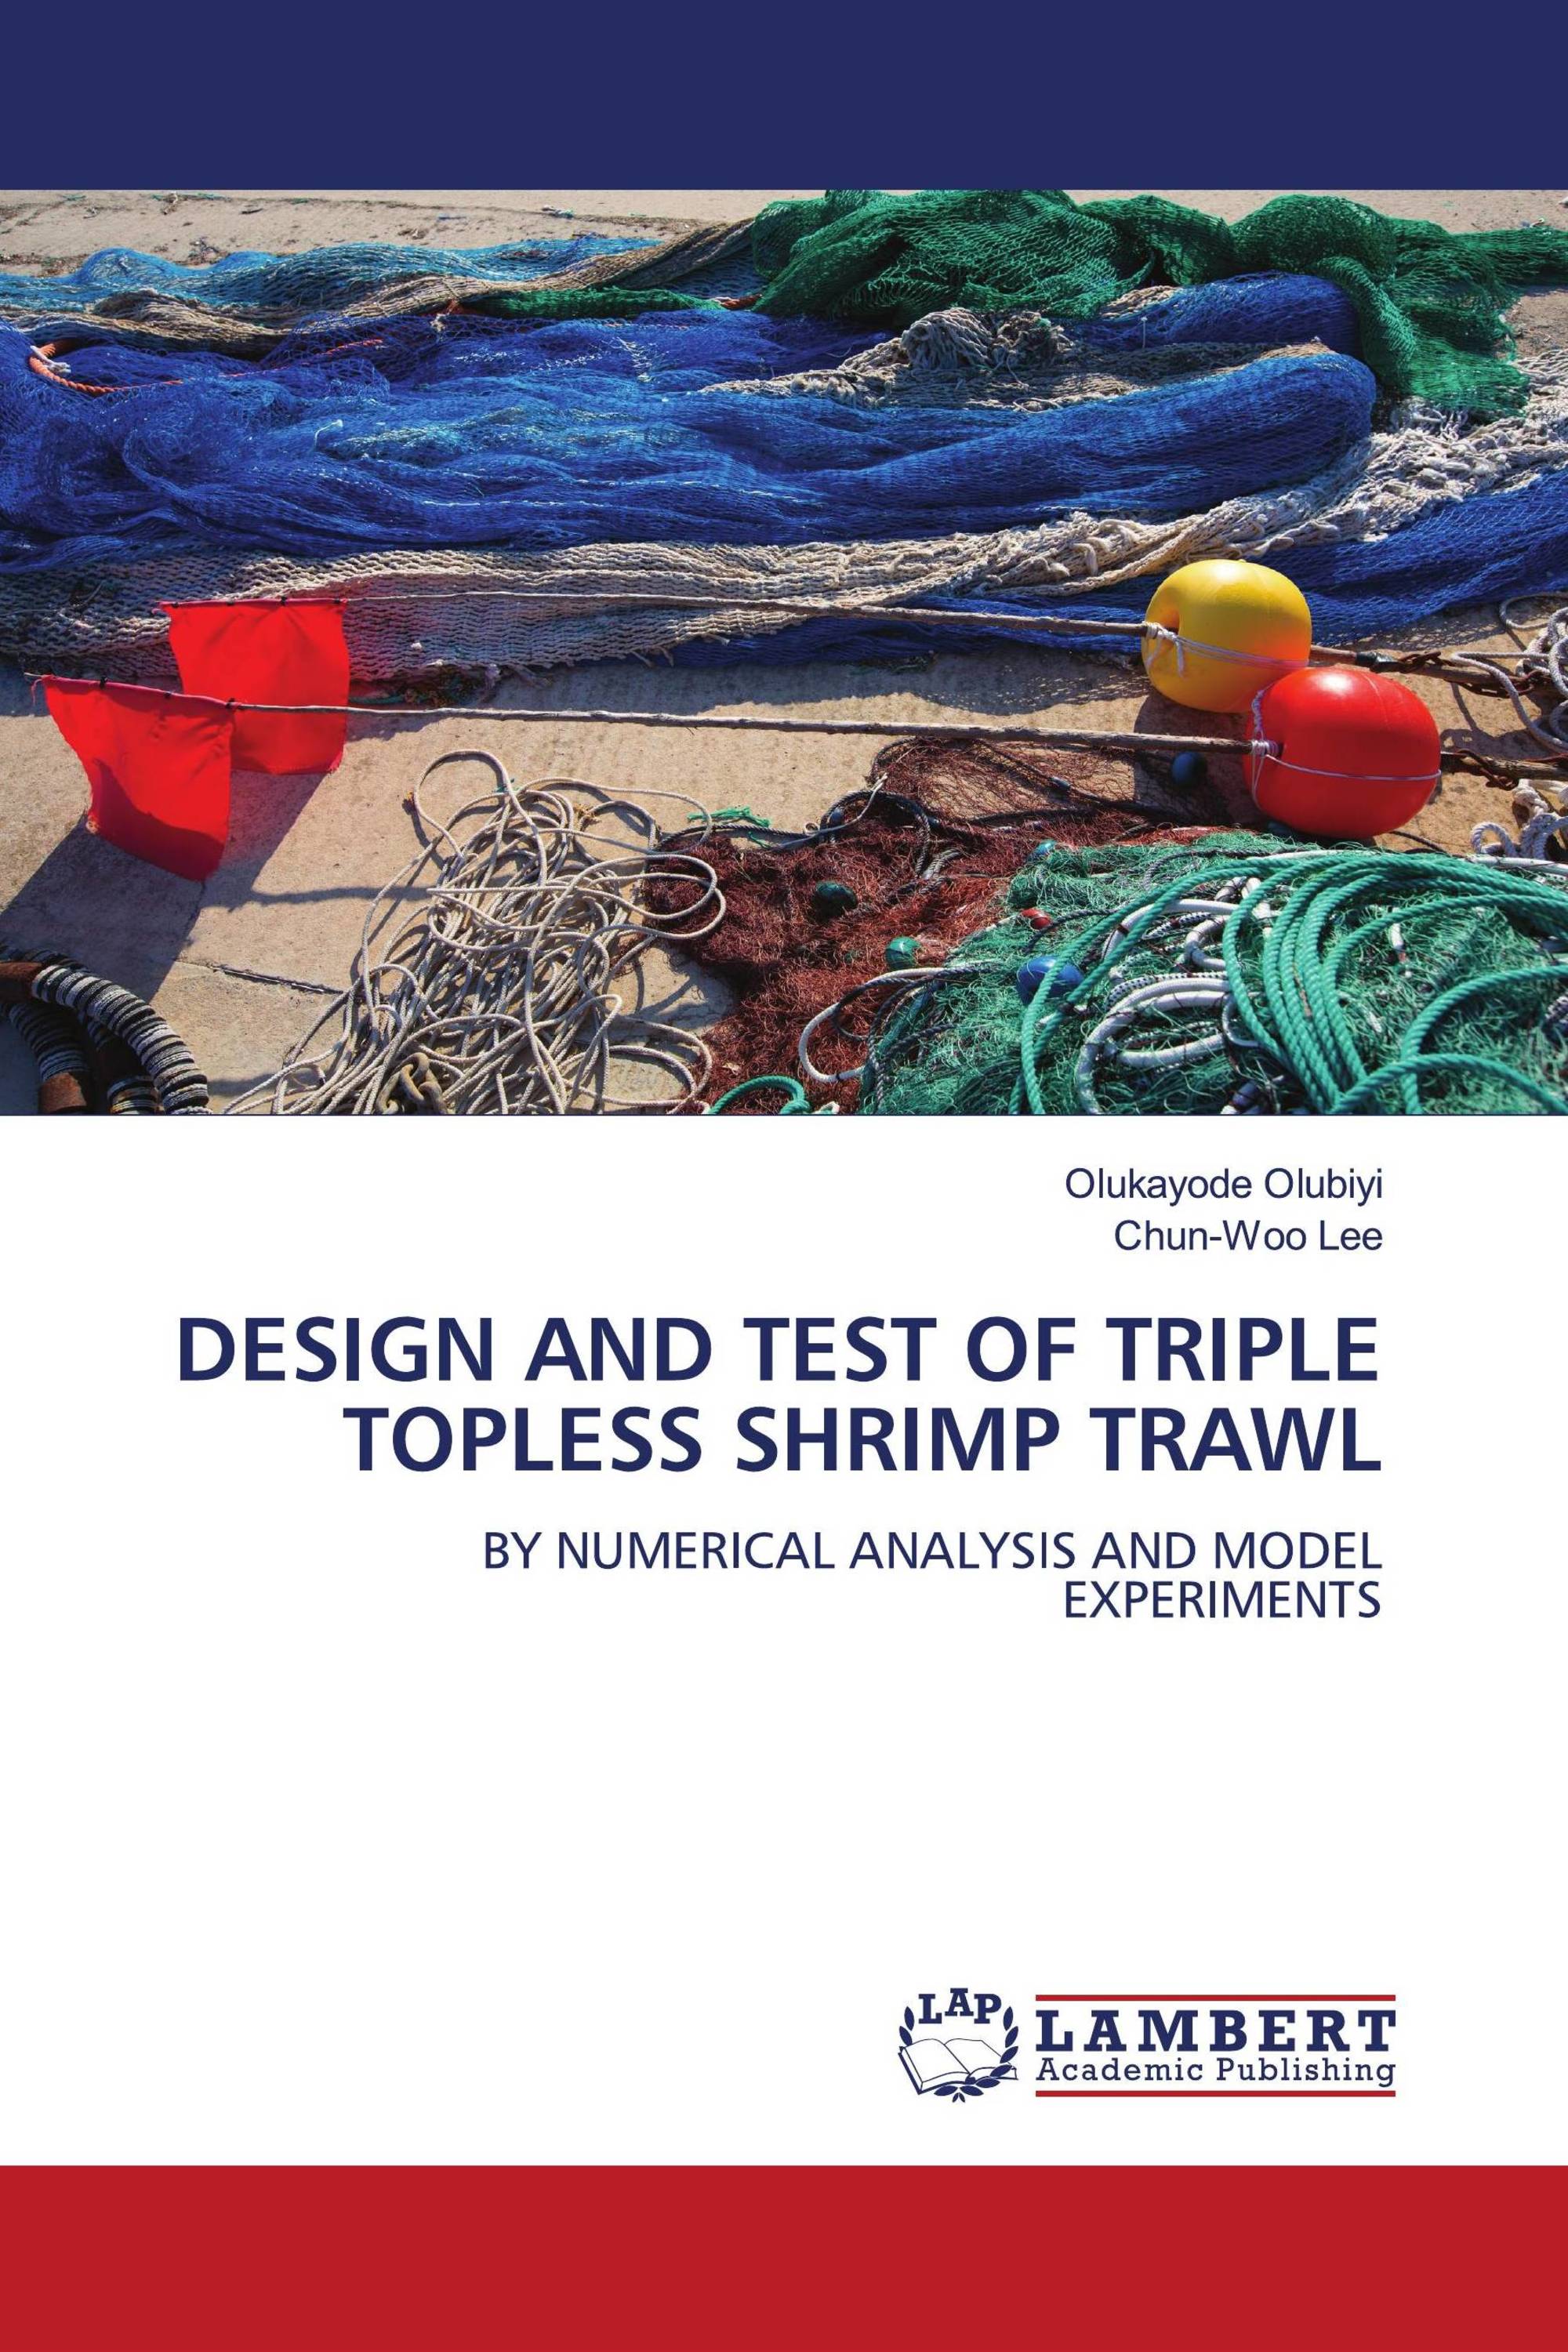 DESIGN AND TEST OF TRIPLE TOPLESS SHRIMP TRAWL